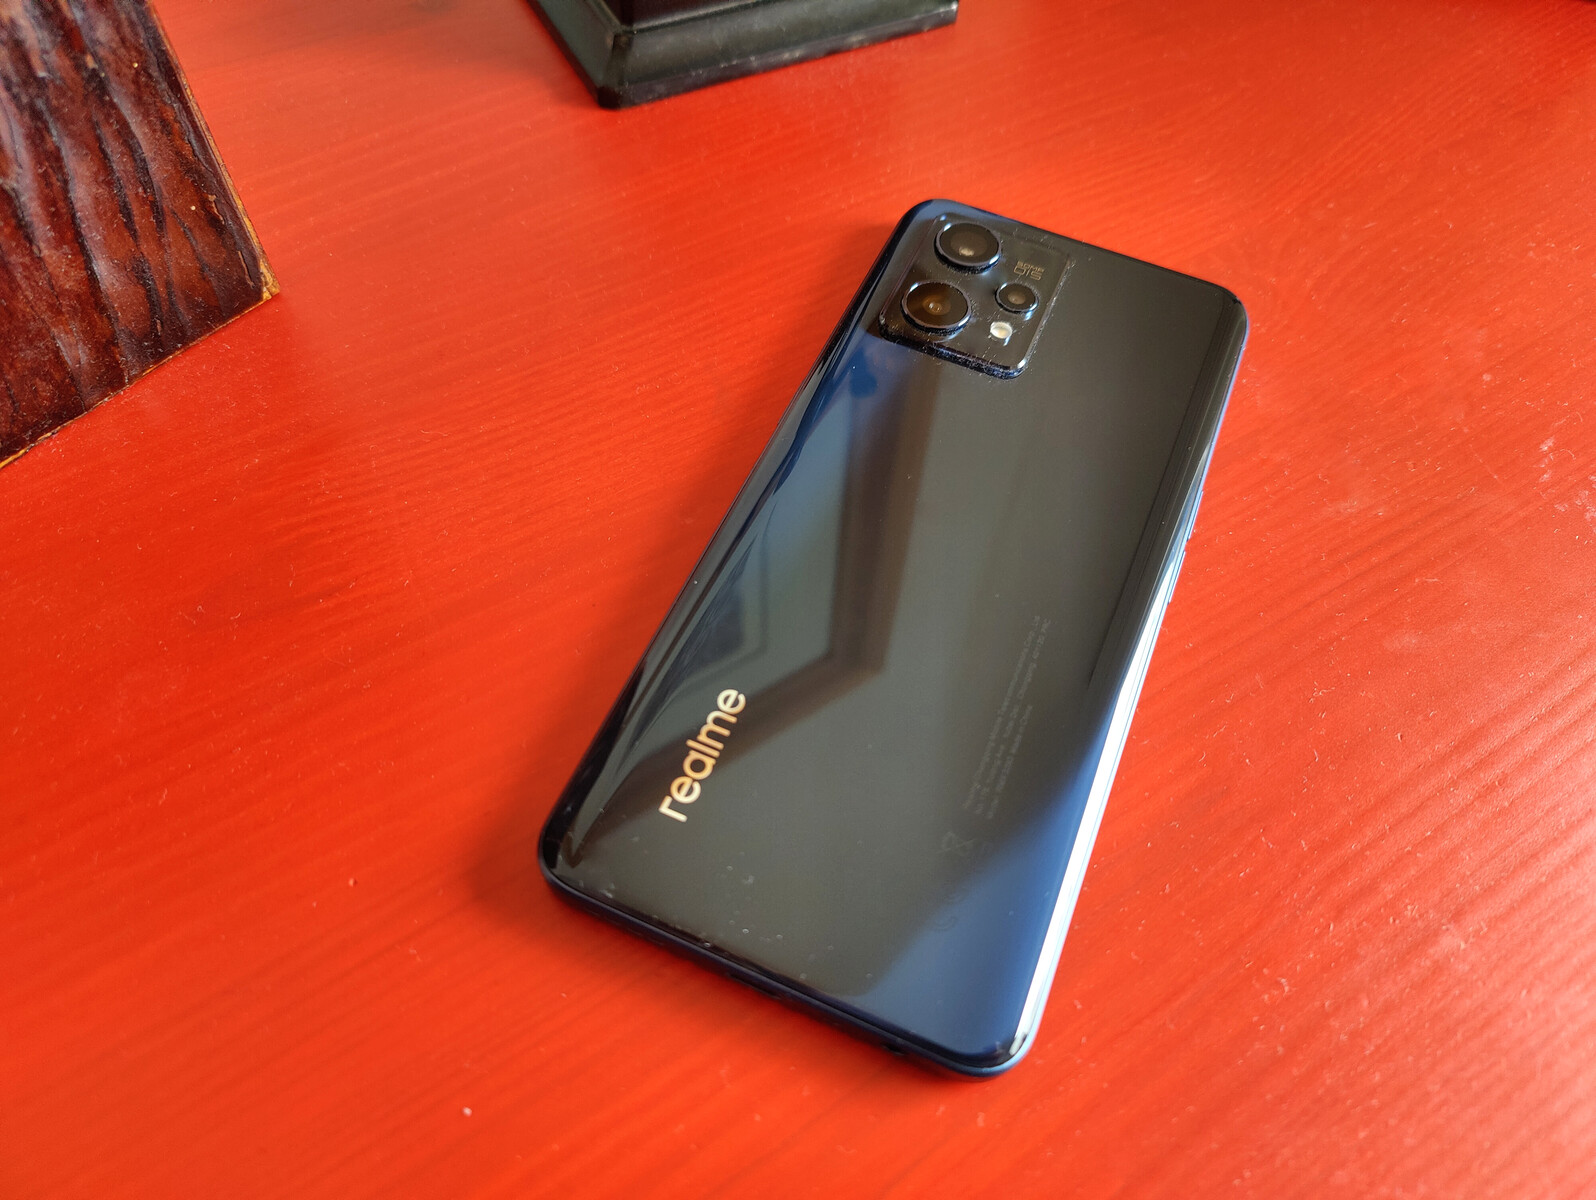 How to turn off inverted colors on realme 10 Pro phone 